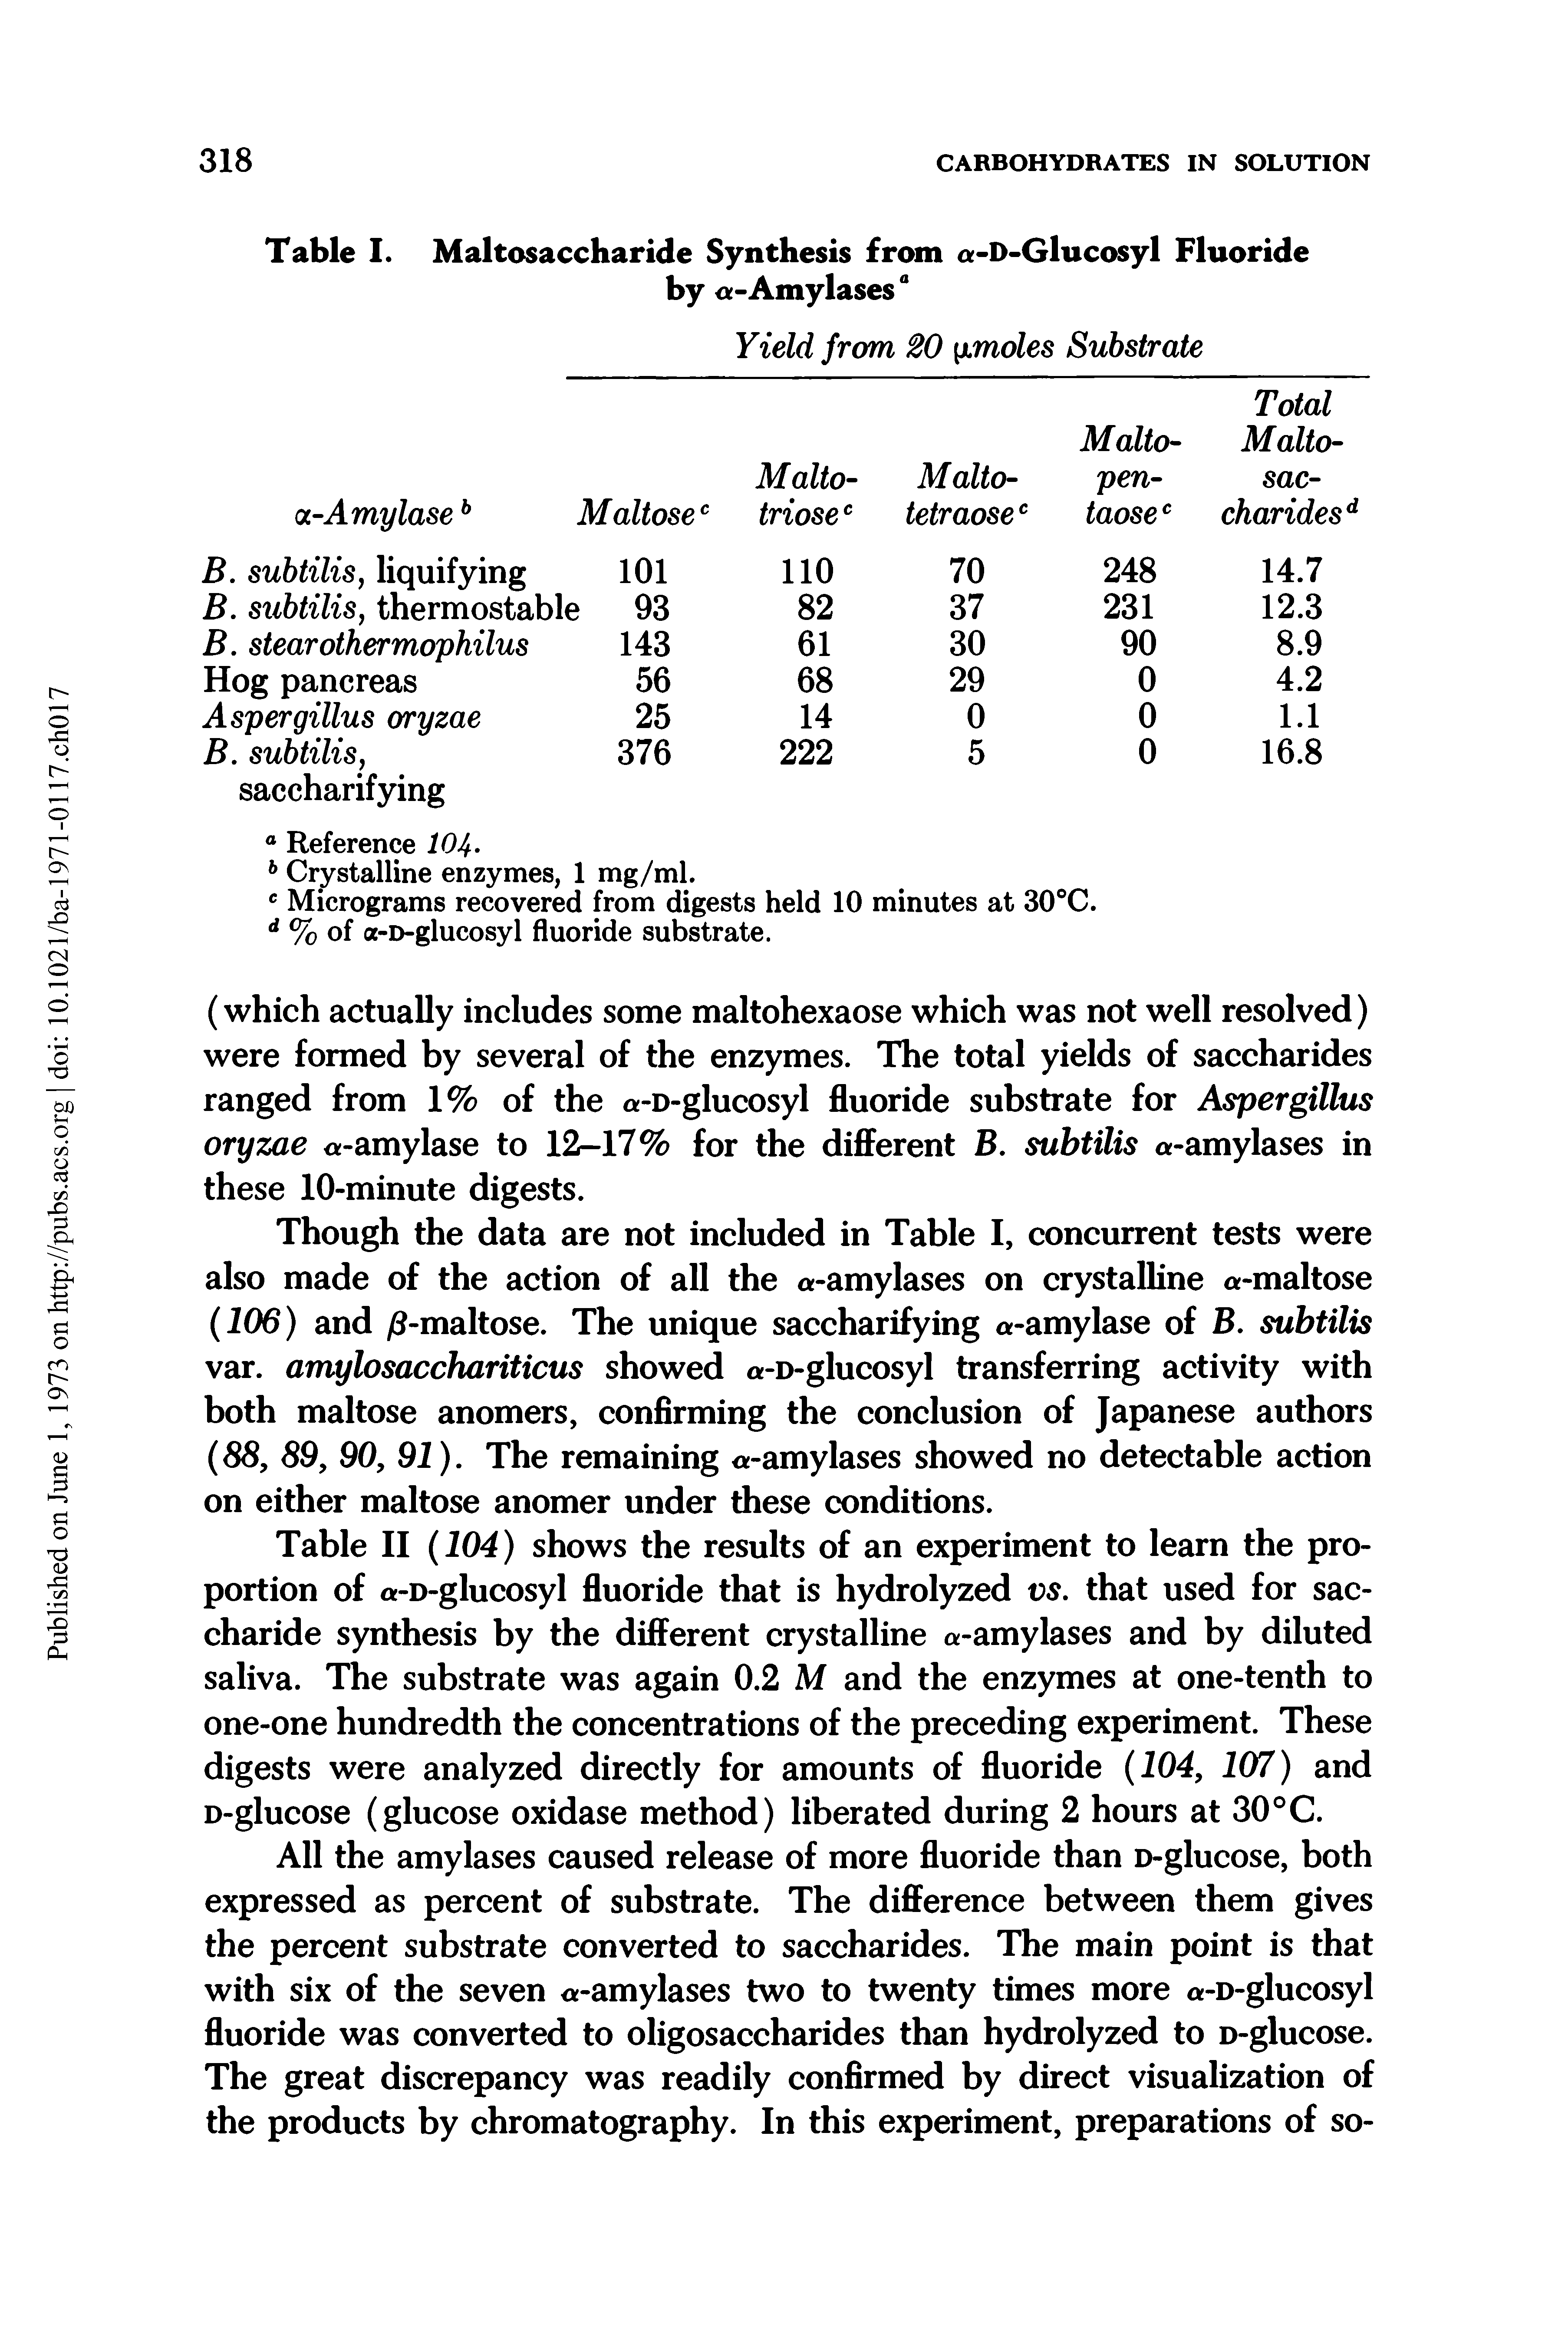 Table II (104) shows the results of an experiment to learn the proportion of a-D-glucosyl fluoride that is hydrolyzed vs. that used for saccharide synthesis by the different crystalline a-amylases and by diluted saliva. The substrate was again 0.2 M and the enzymes at one-tenth to one-one hundredth the concentrations of the preceding experiment. These digests were analyzed directly for amounts of fluoride (104, 107) and D-glucose (glucose oxidase method) liberated during 2 hours at 30°C.